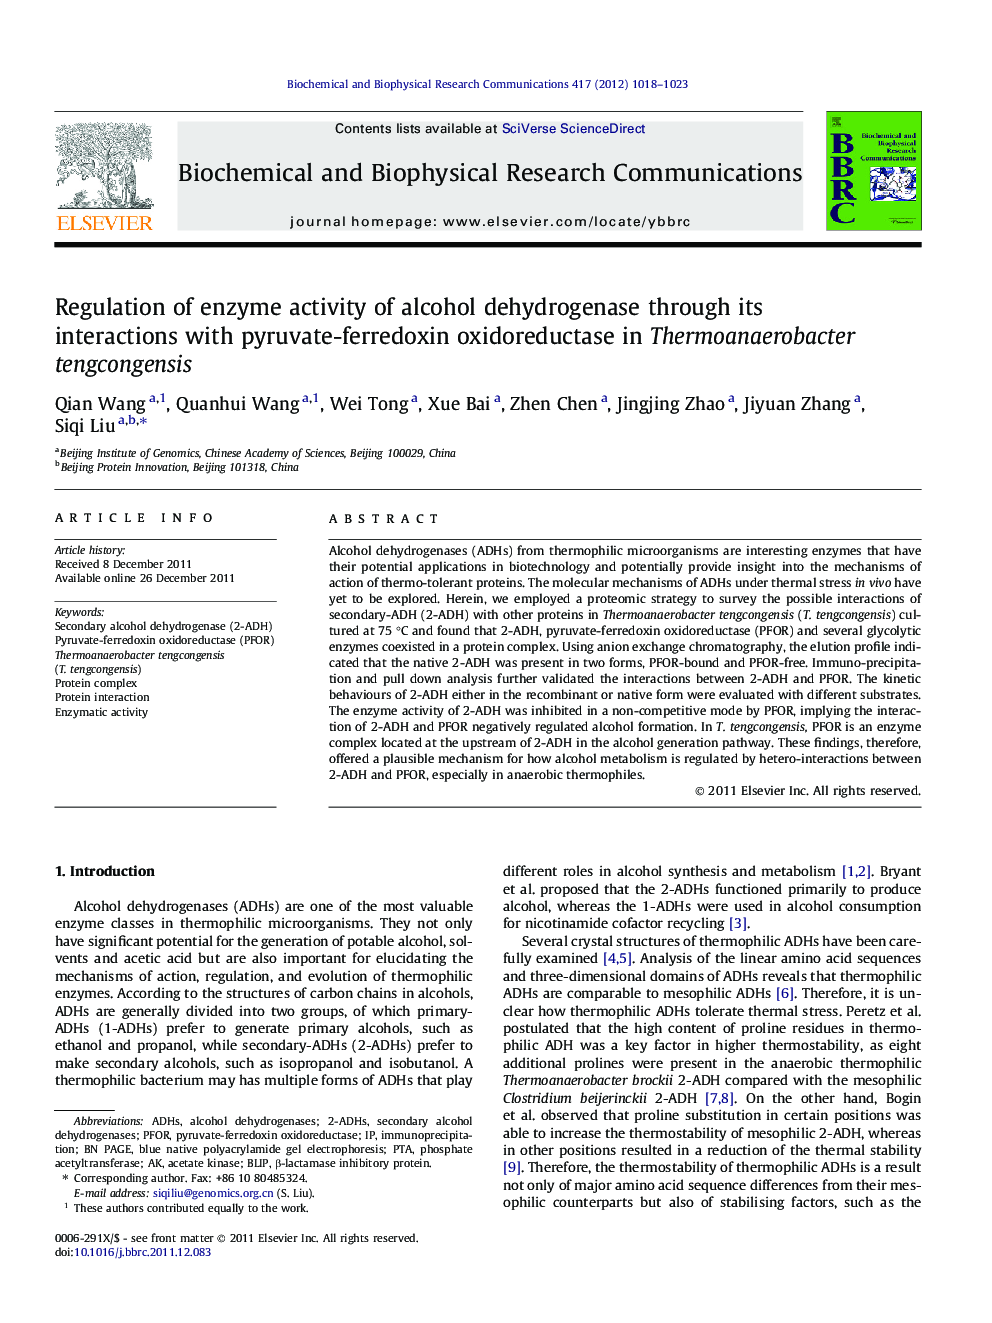 Regulation of enzyme activity of alcohol dehydrogenase through its interactions with pyruvate-ferredoxin oxidoreductase in Thermoanaerobacter tengcongensis